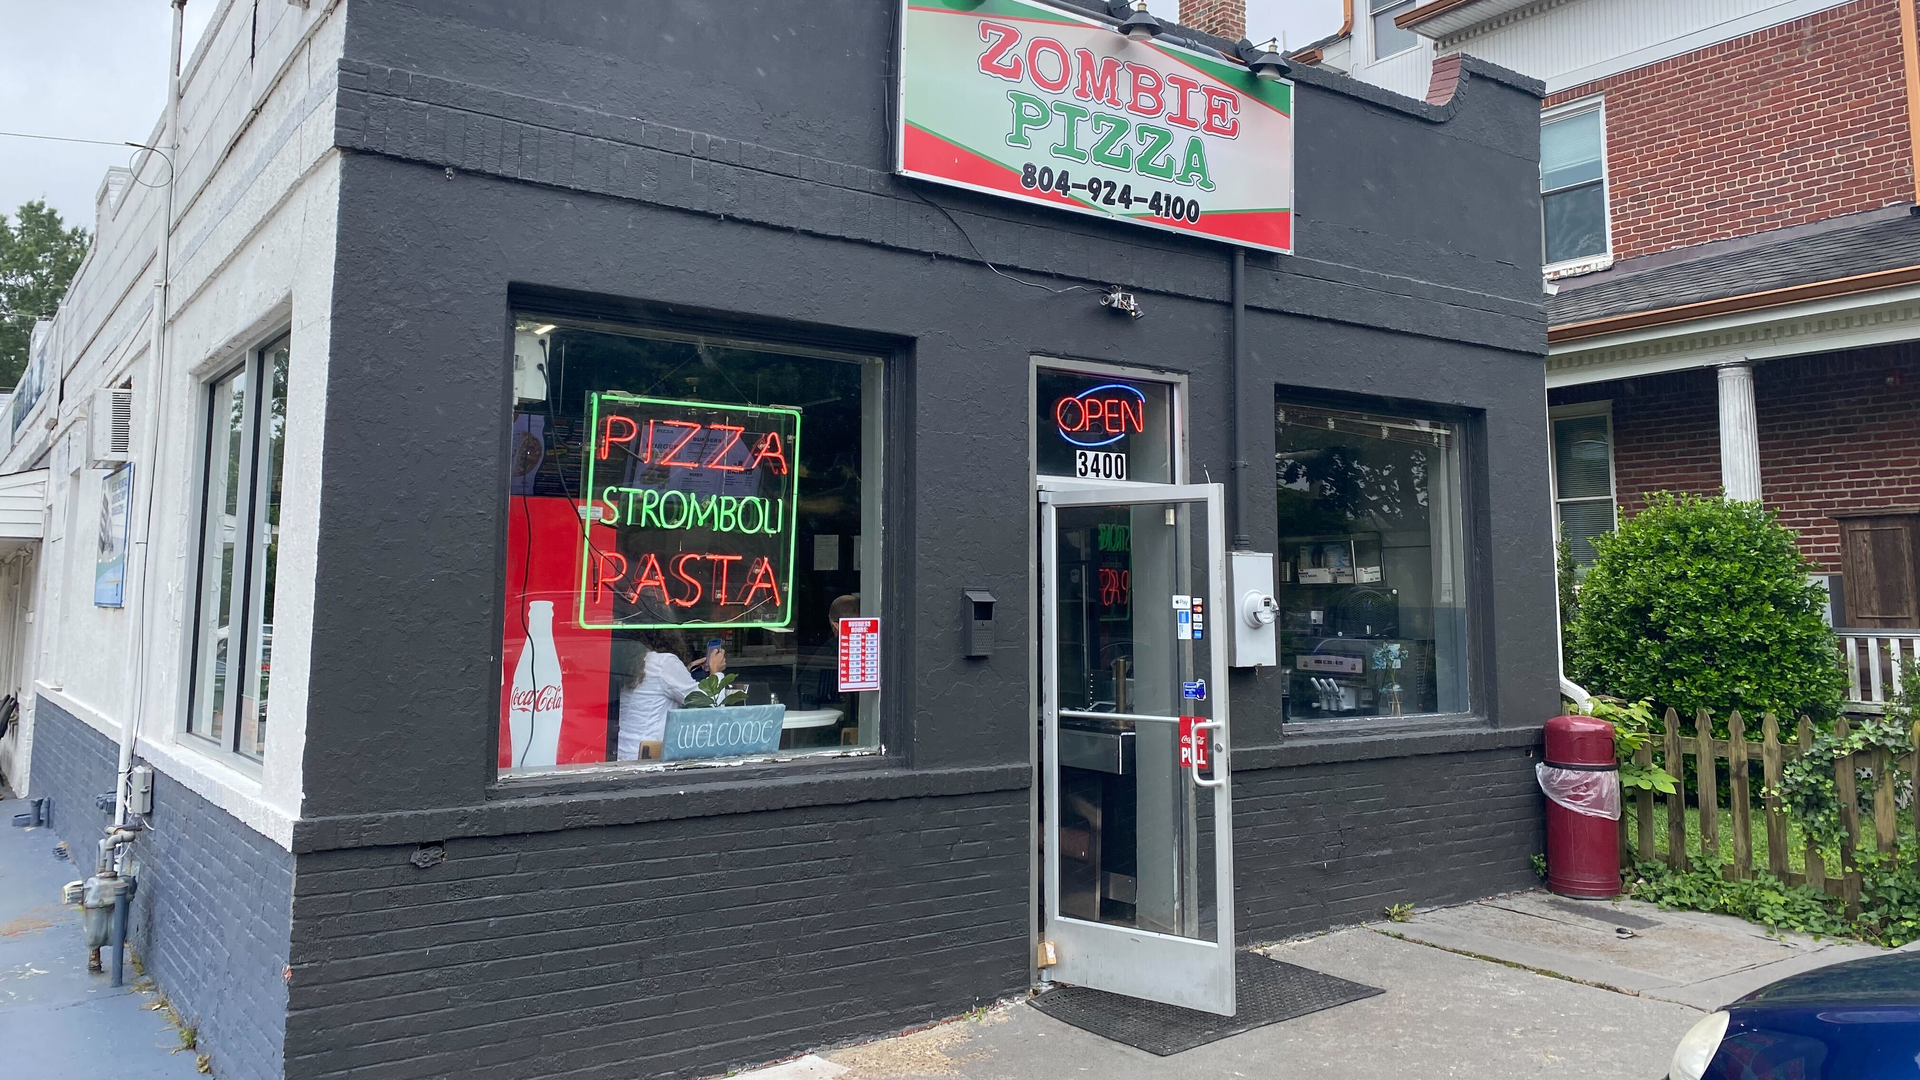 The exterior of Zombie pizza, which is a squat, brick building. 